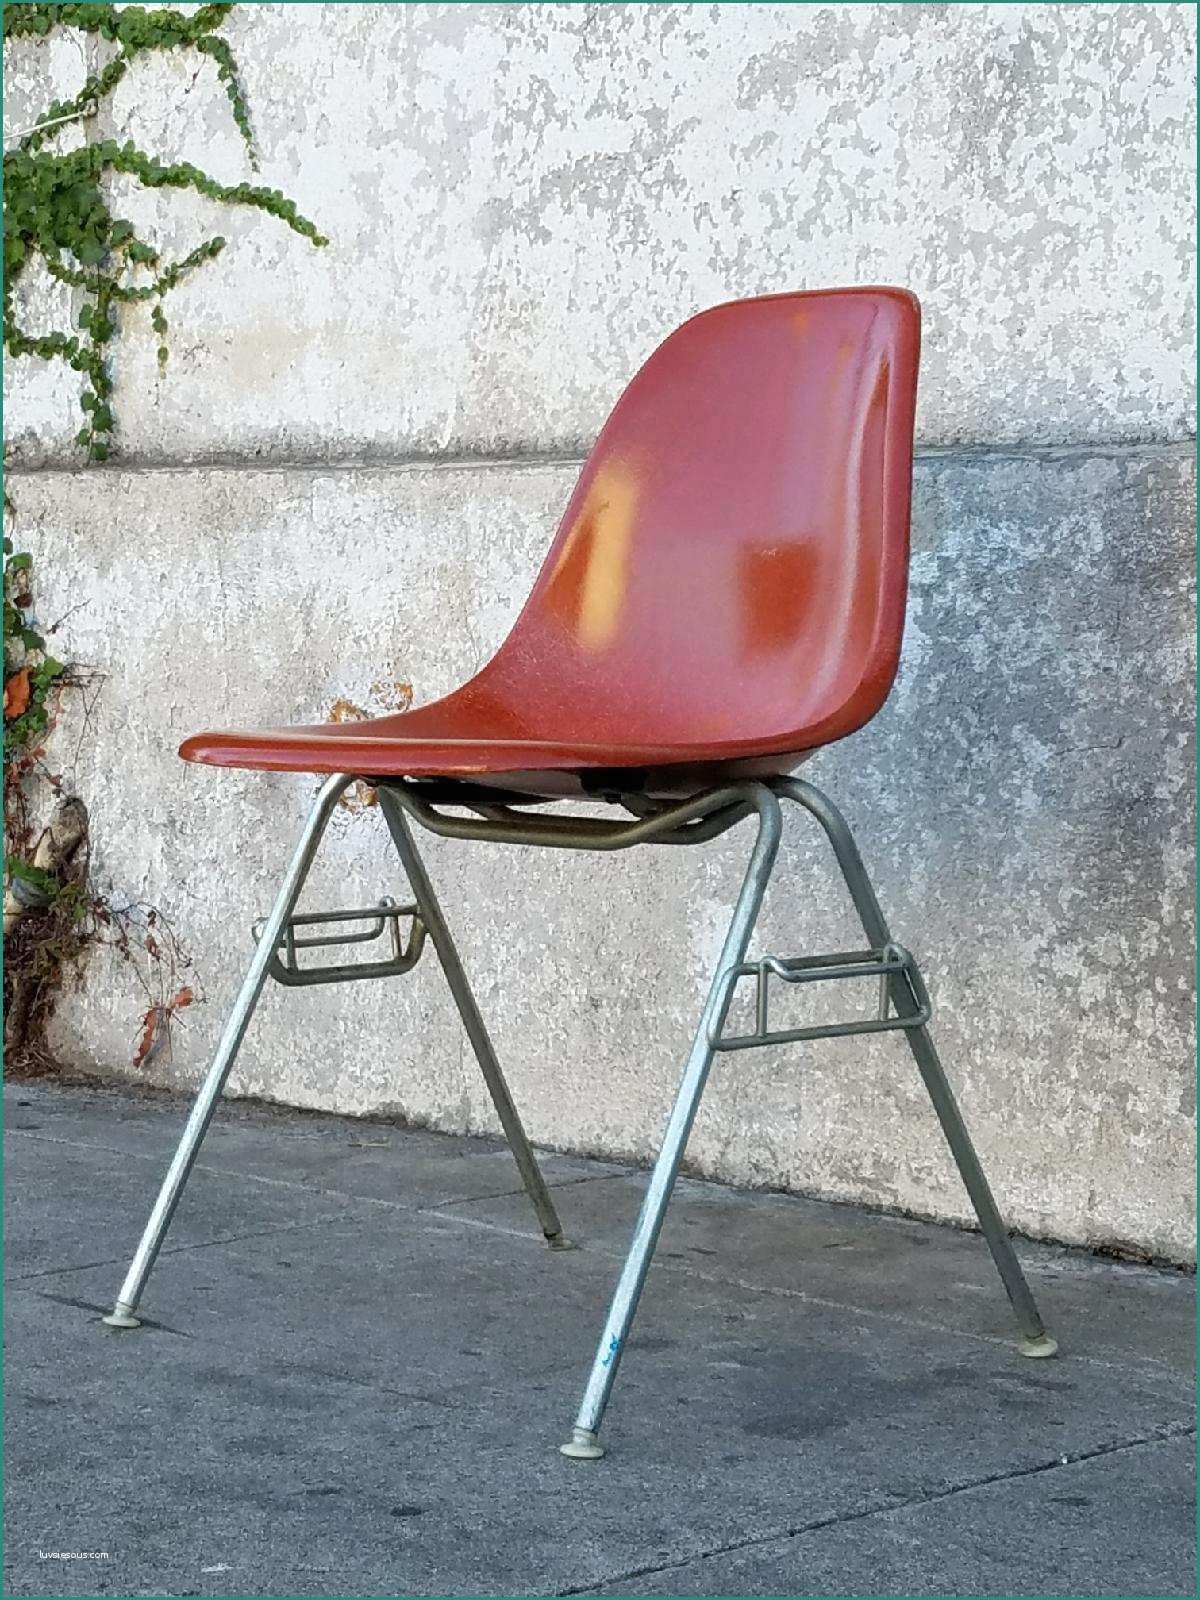 Eames Chair Dwg E Brick Red Vintage Herman Miller Eames Chair I P